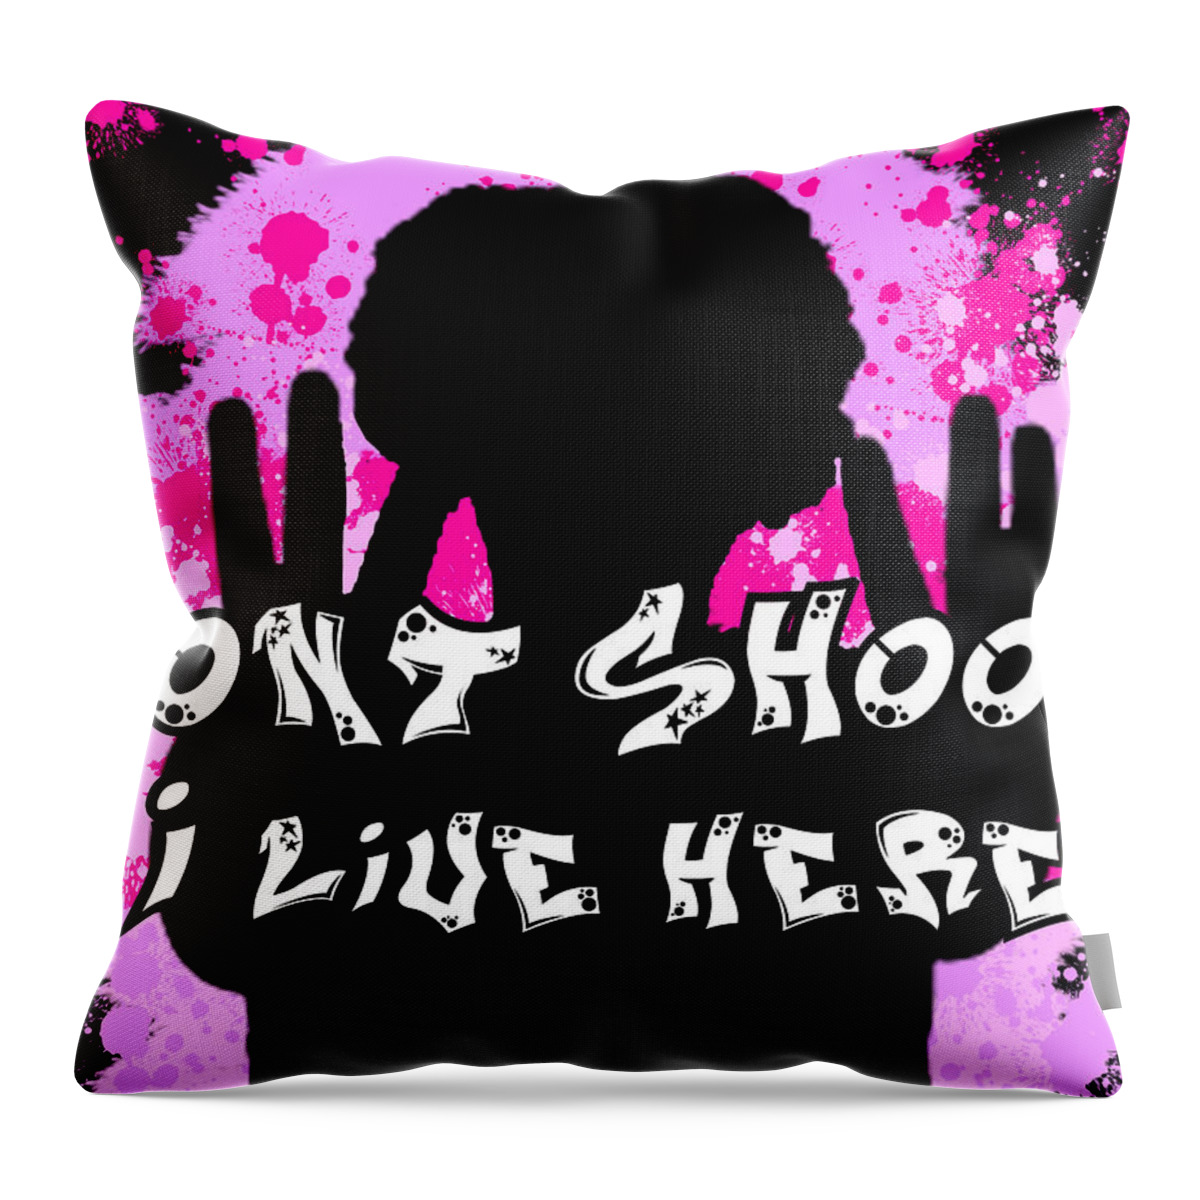 Don't Shoot I Live Here Throw Pillow featuring the digital art Don't Shoot I Live Here by Revy AP